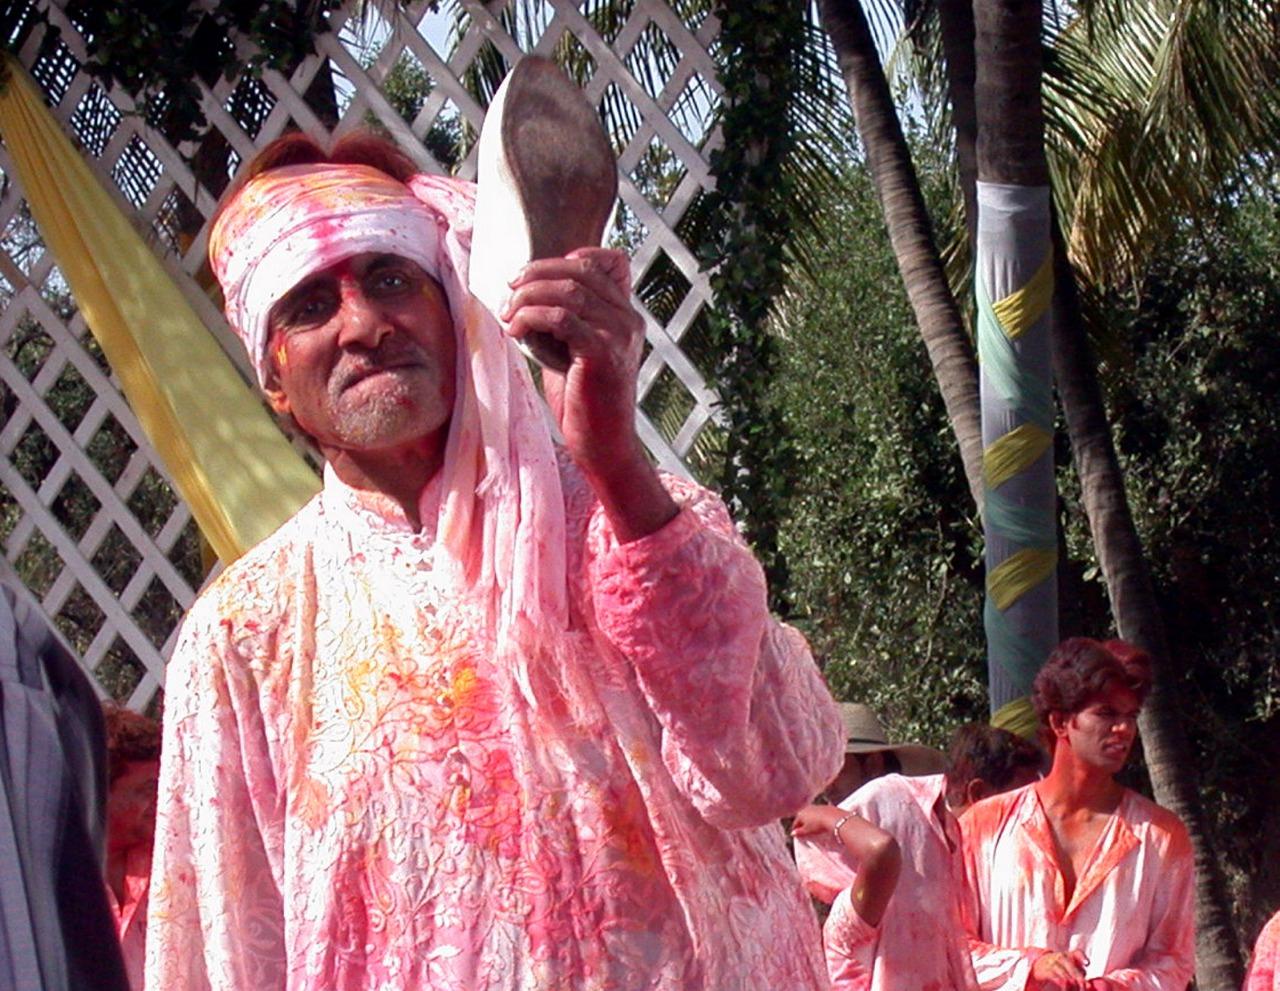 Amitabh Bachchan and the festival of Holi are synonymous with his song, 'Rang Barse' being a festival favourite. Here is a candid picture of the actor during Holi covered in colours and holding a shoe